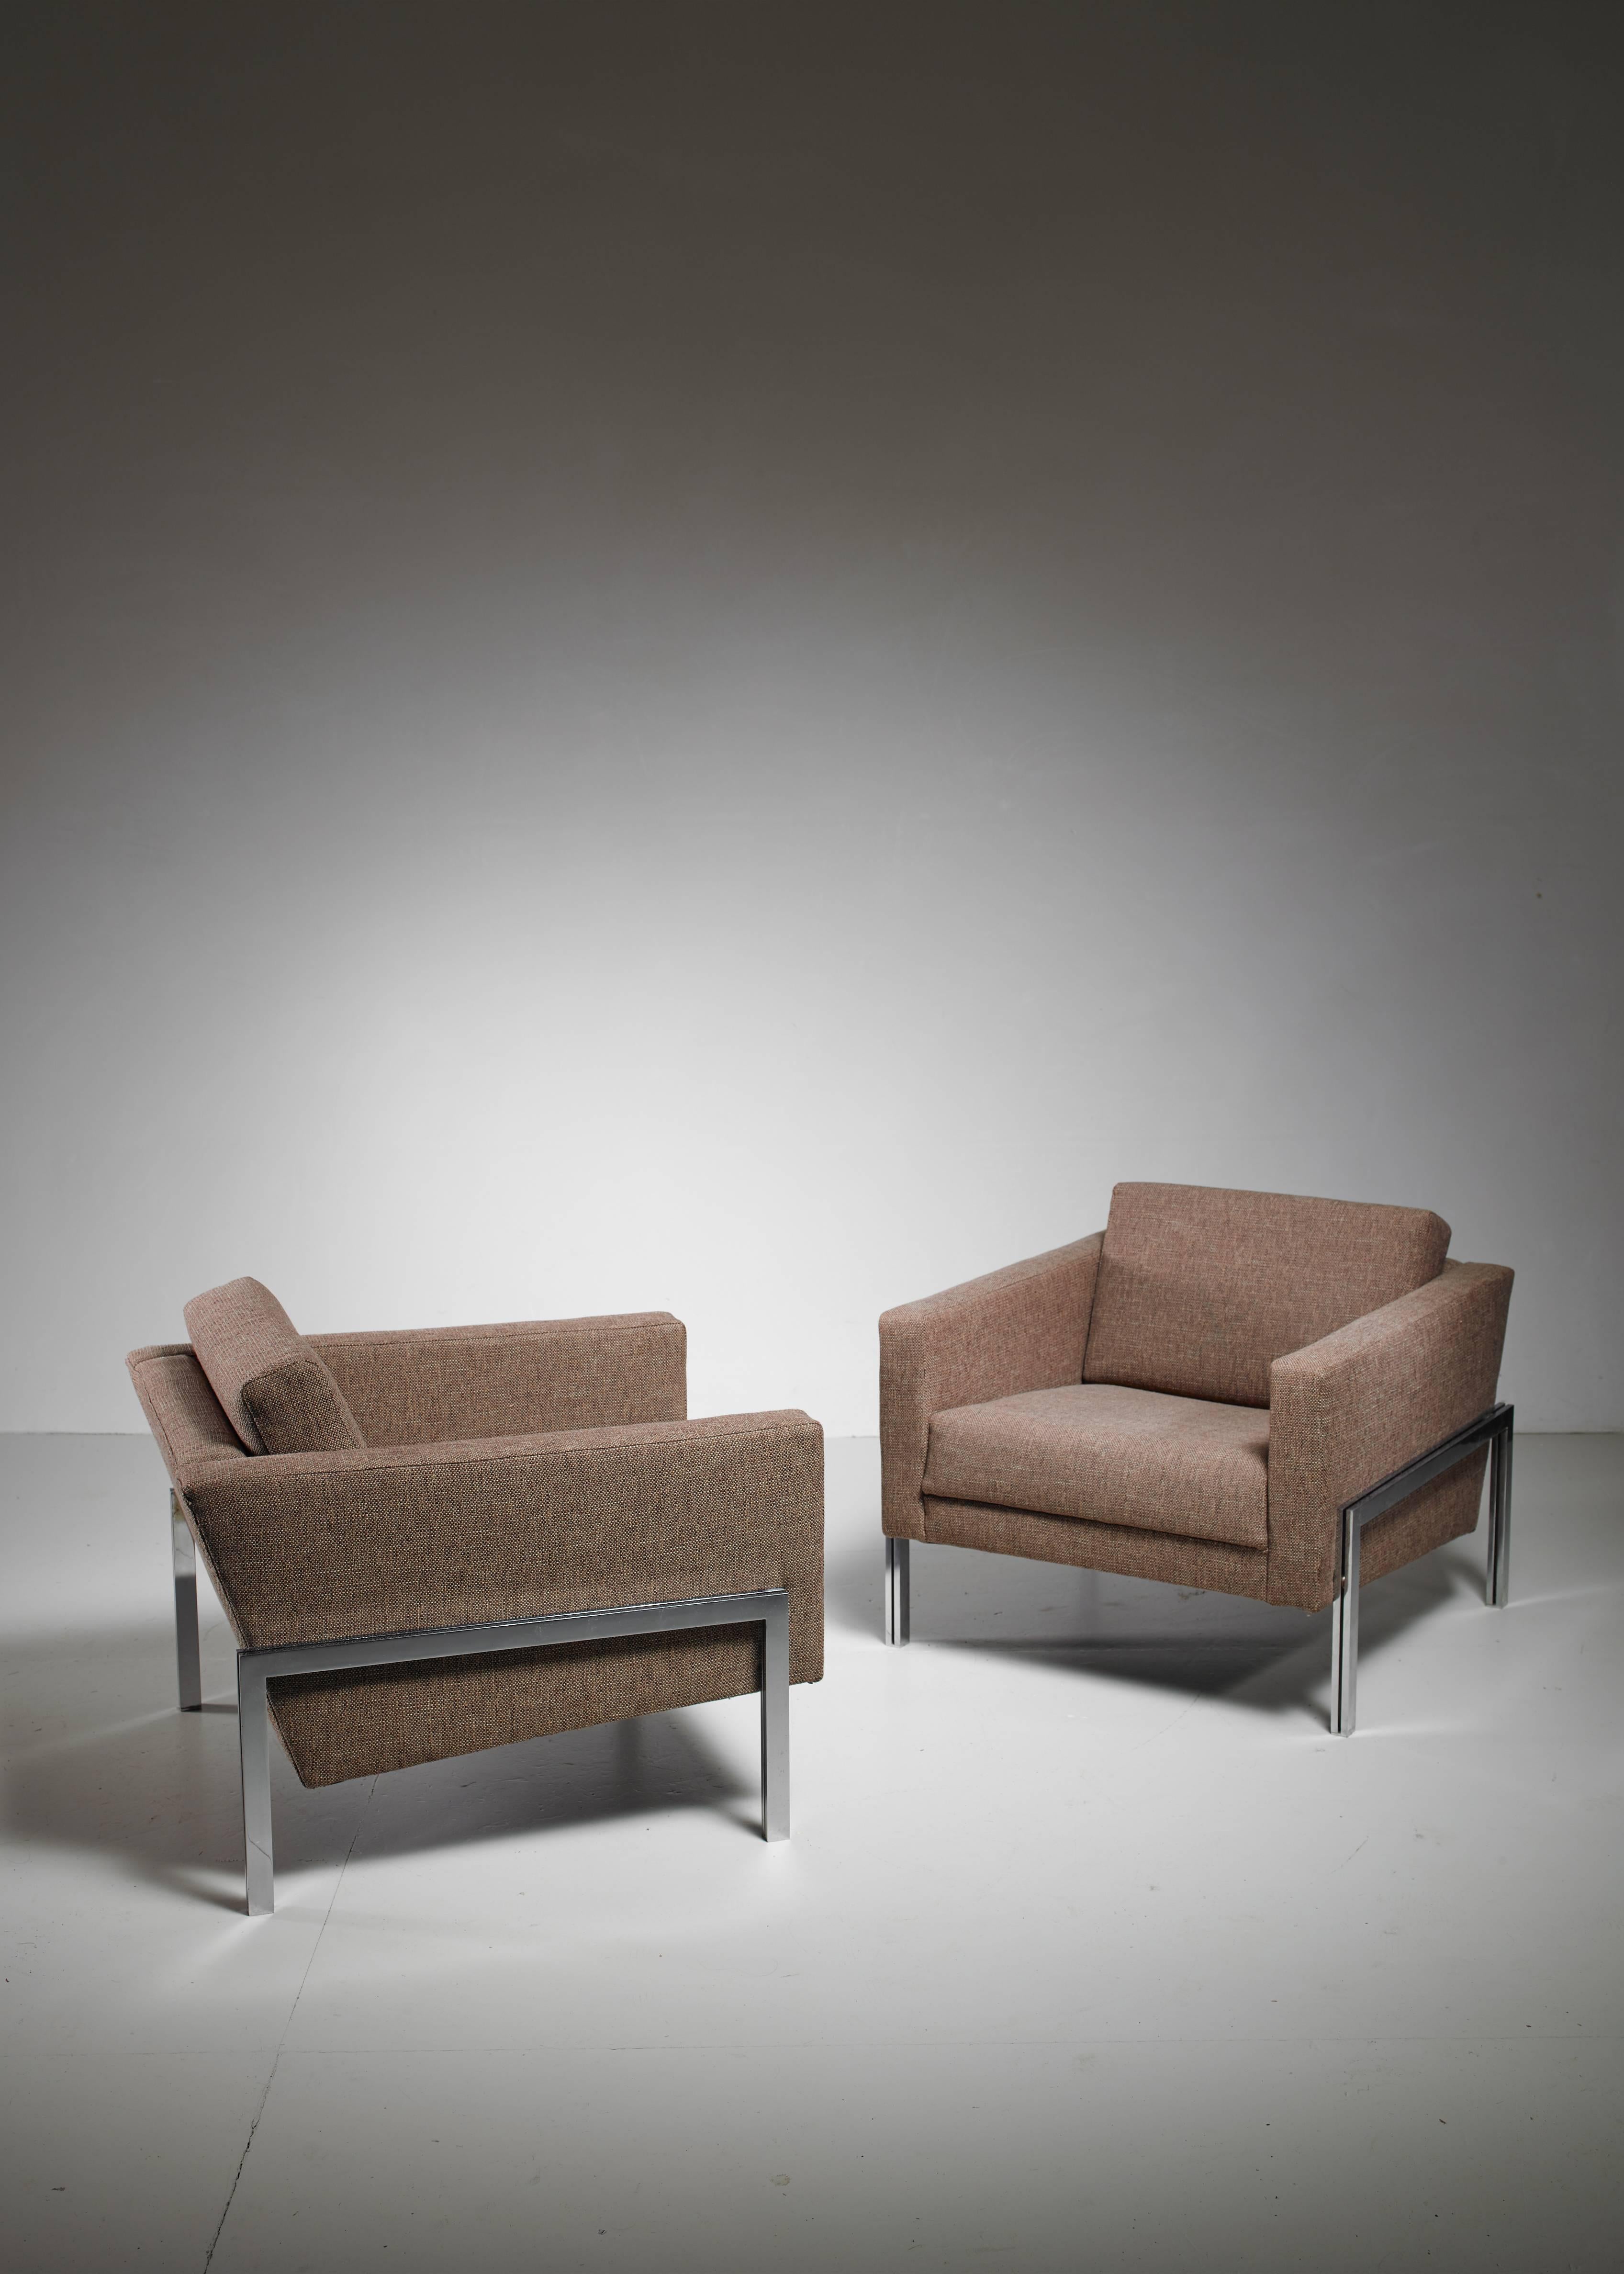 A pair of lounge chairs by Swiss designer Kurt Thut. The chairs have a metal frame and are newly upholstered in brown grey fabric and in a perfect condition.